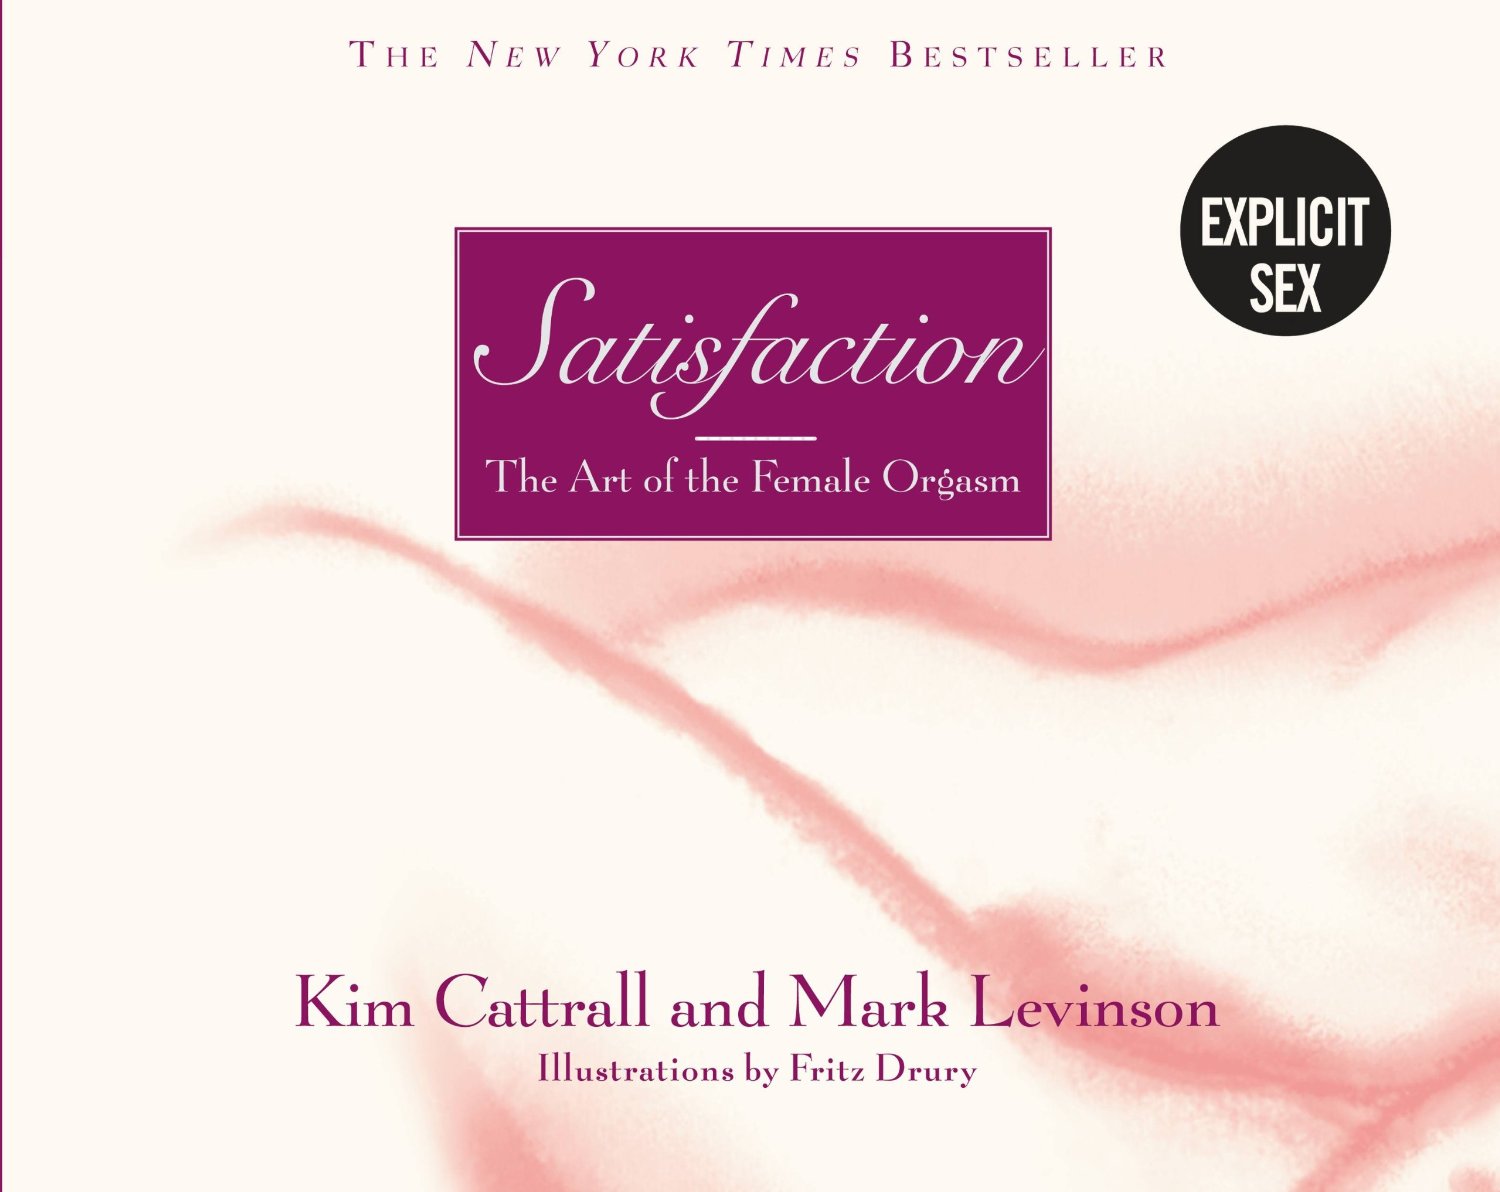 Review: "Satisfaction: The Art of the Female Orgasm", by Kim Cattrall and Mark Levinson 8